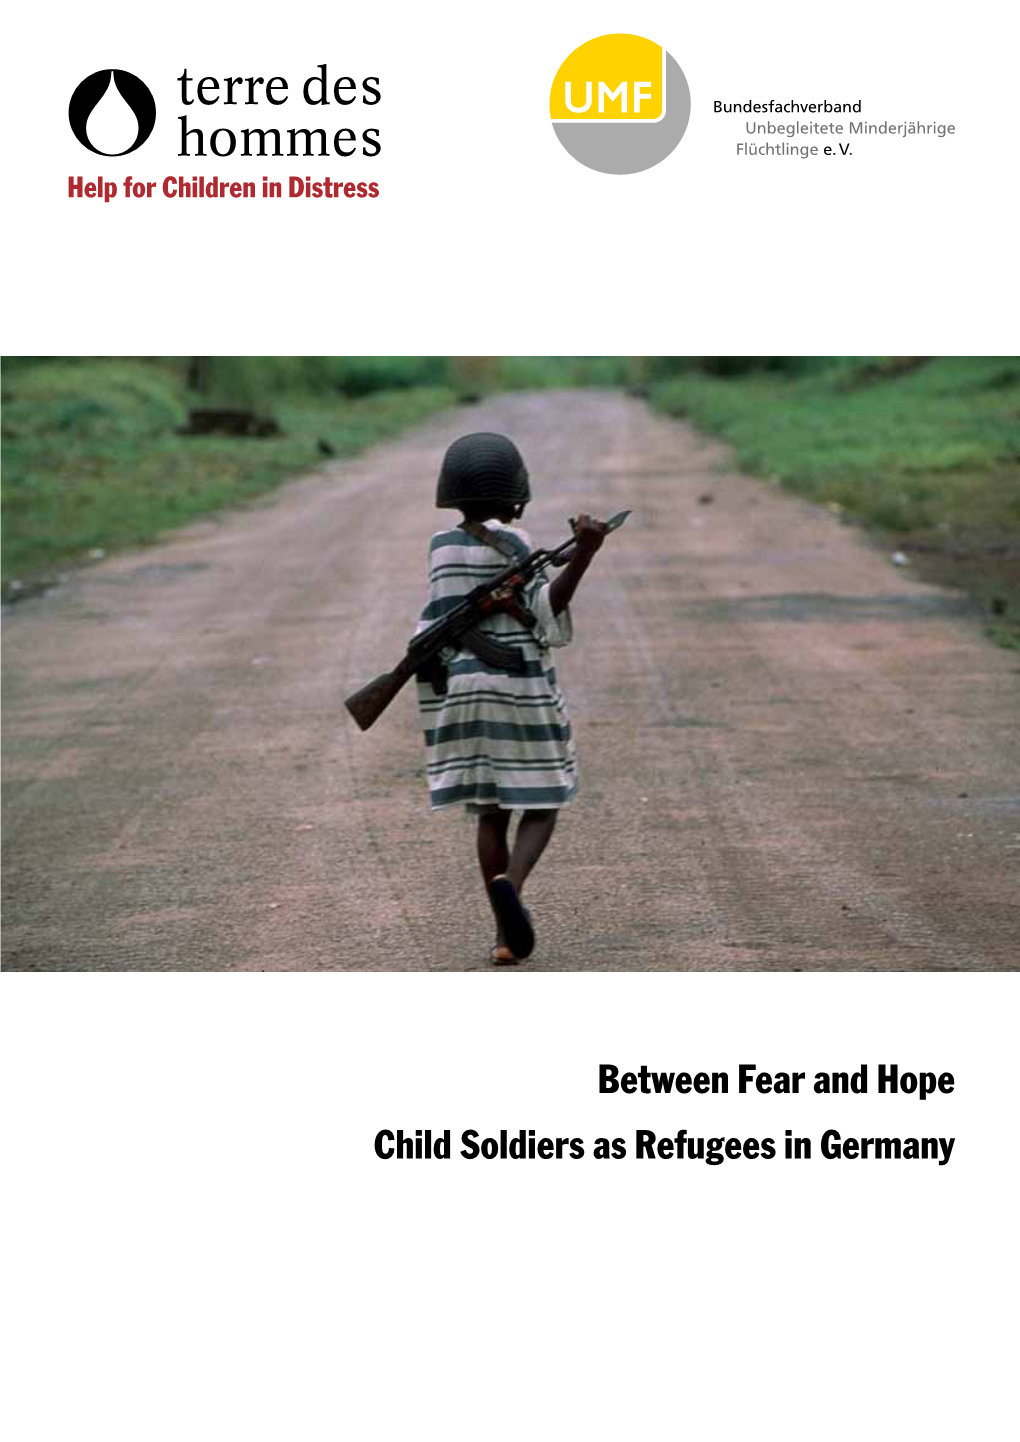 Between Fear and Hope Child Soldiers As Refugees in Germany Between Fear and Hope – Child Soldiers As Refugees in Germany Terre Des Hommes – B-UMF